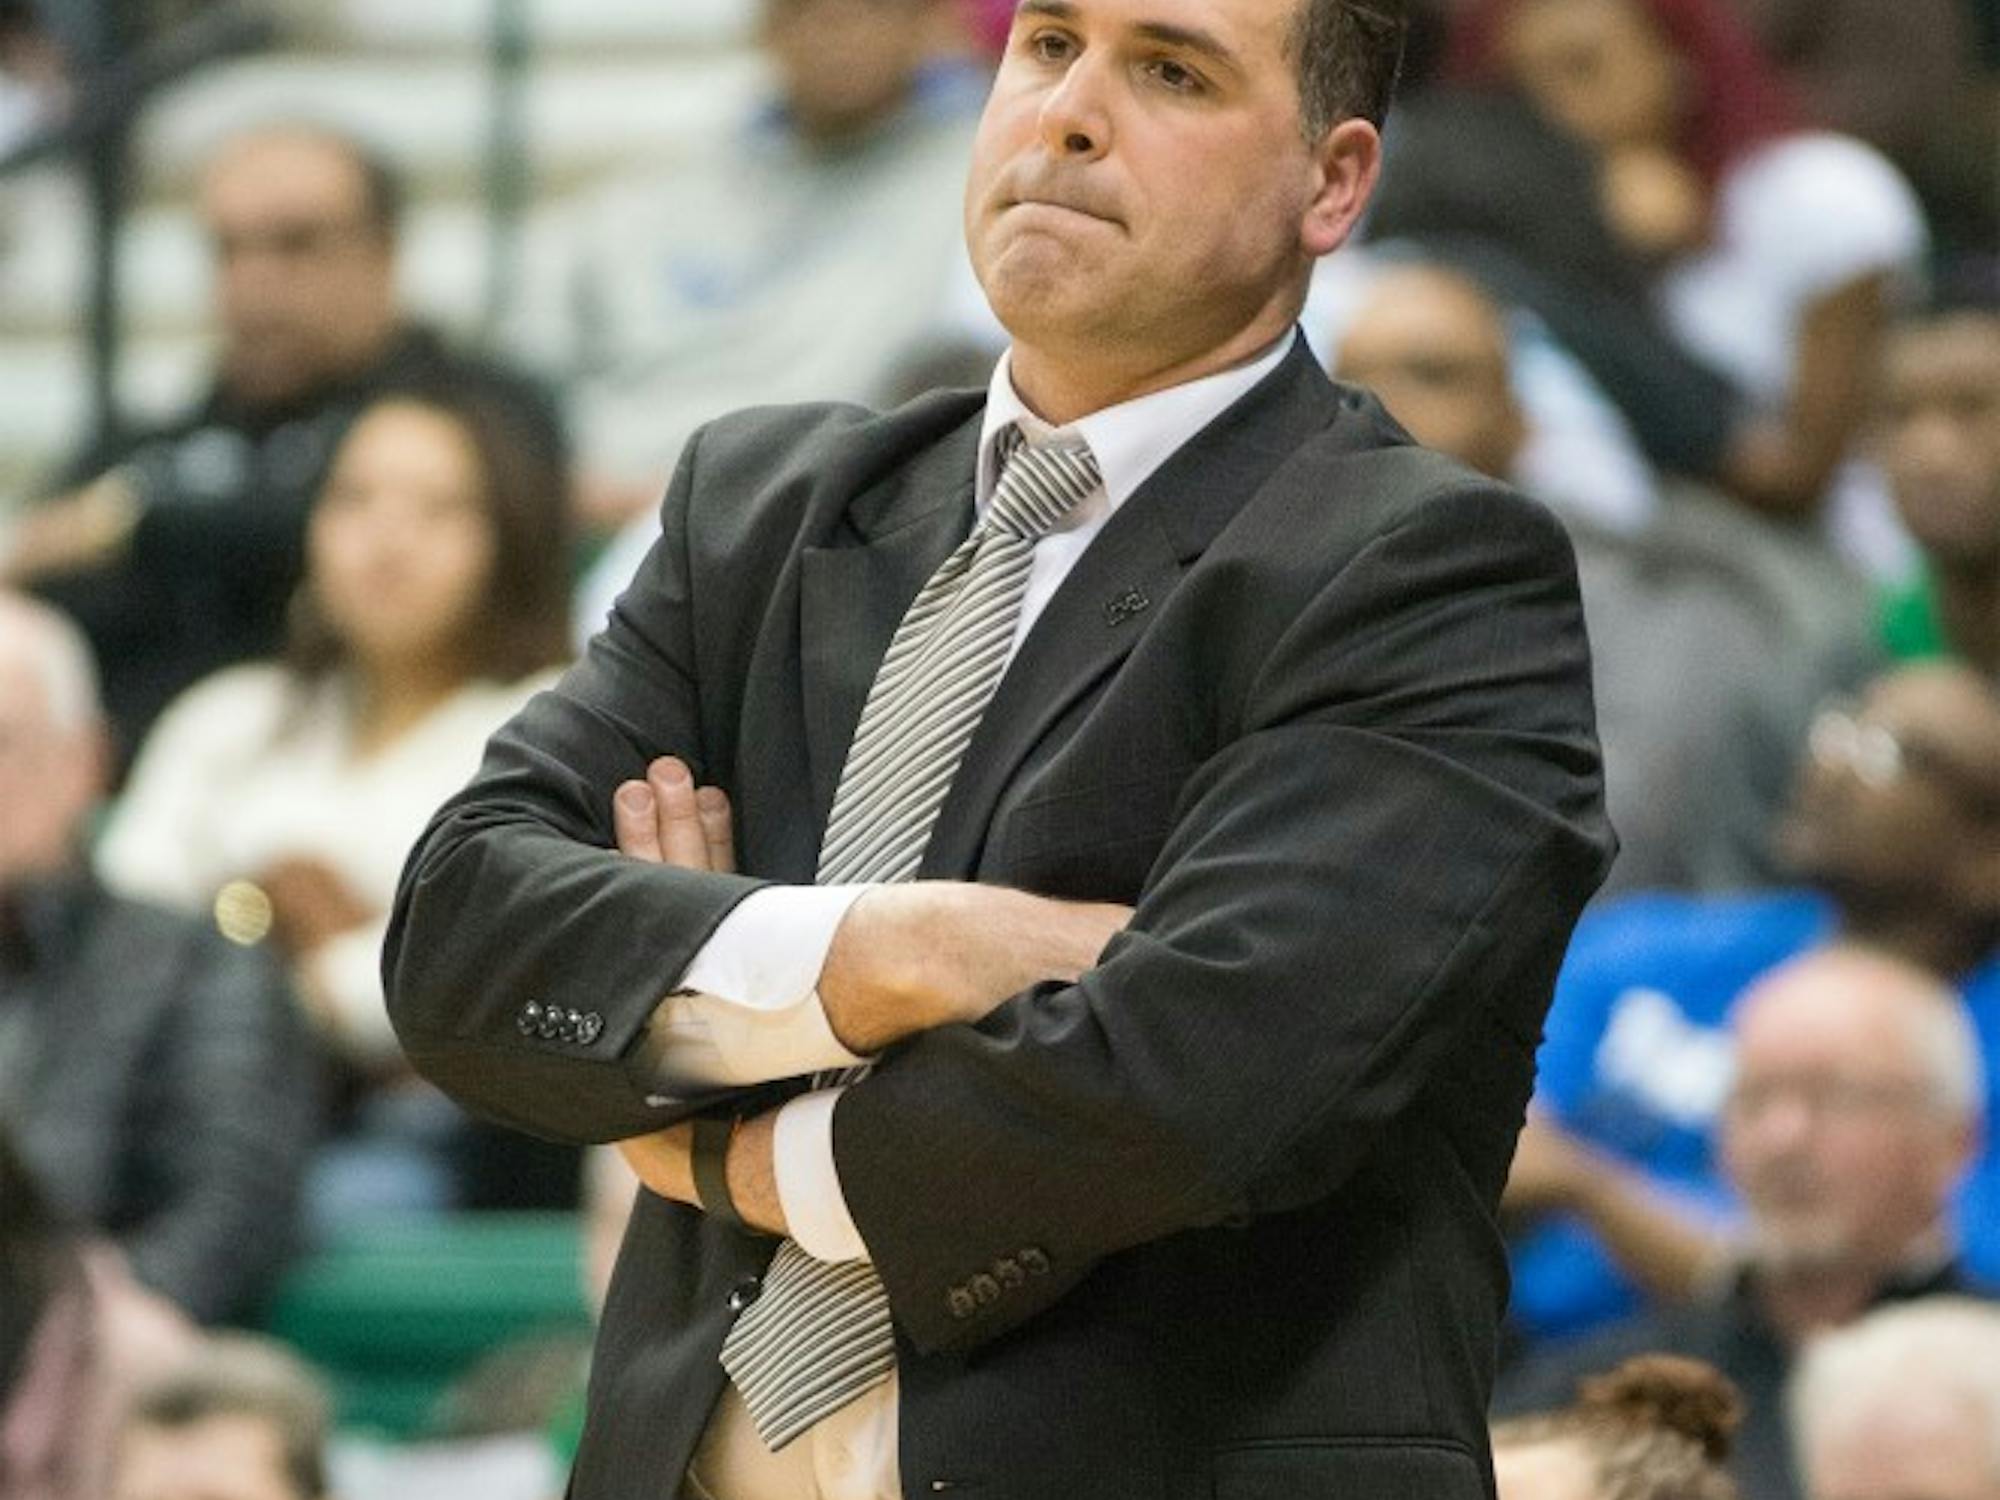 Eastern Michigan head coach Tory Verdi doesn't look happy about the poor first-half performance of the Eagles during their game against Central Michigan on 8 March at the Convocation Center.  The second half turned around, and EMU won 99-83 in an overtime thriller.